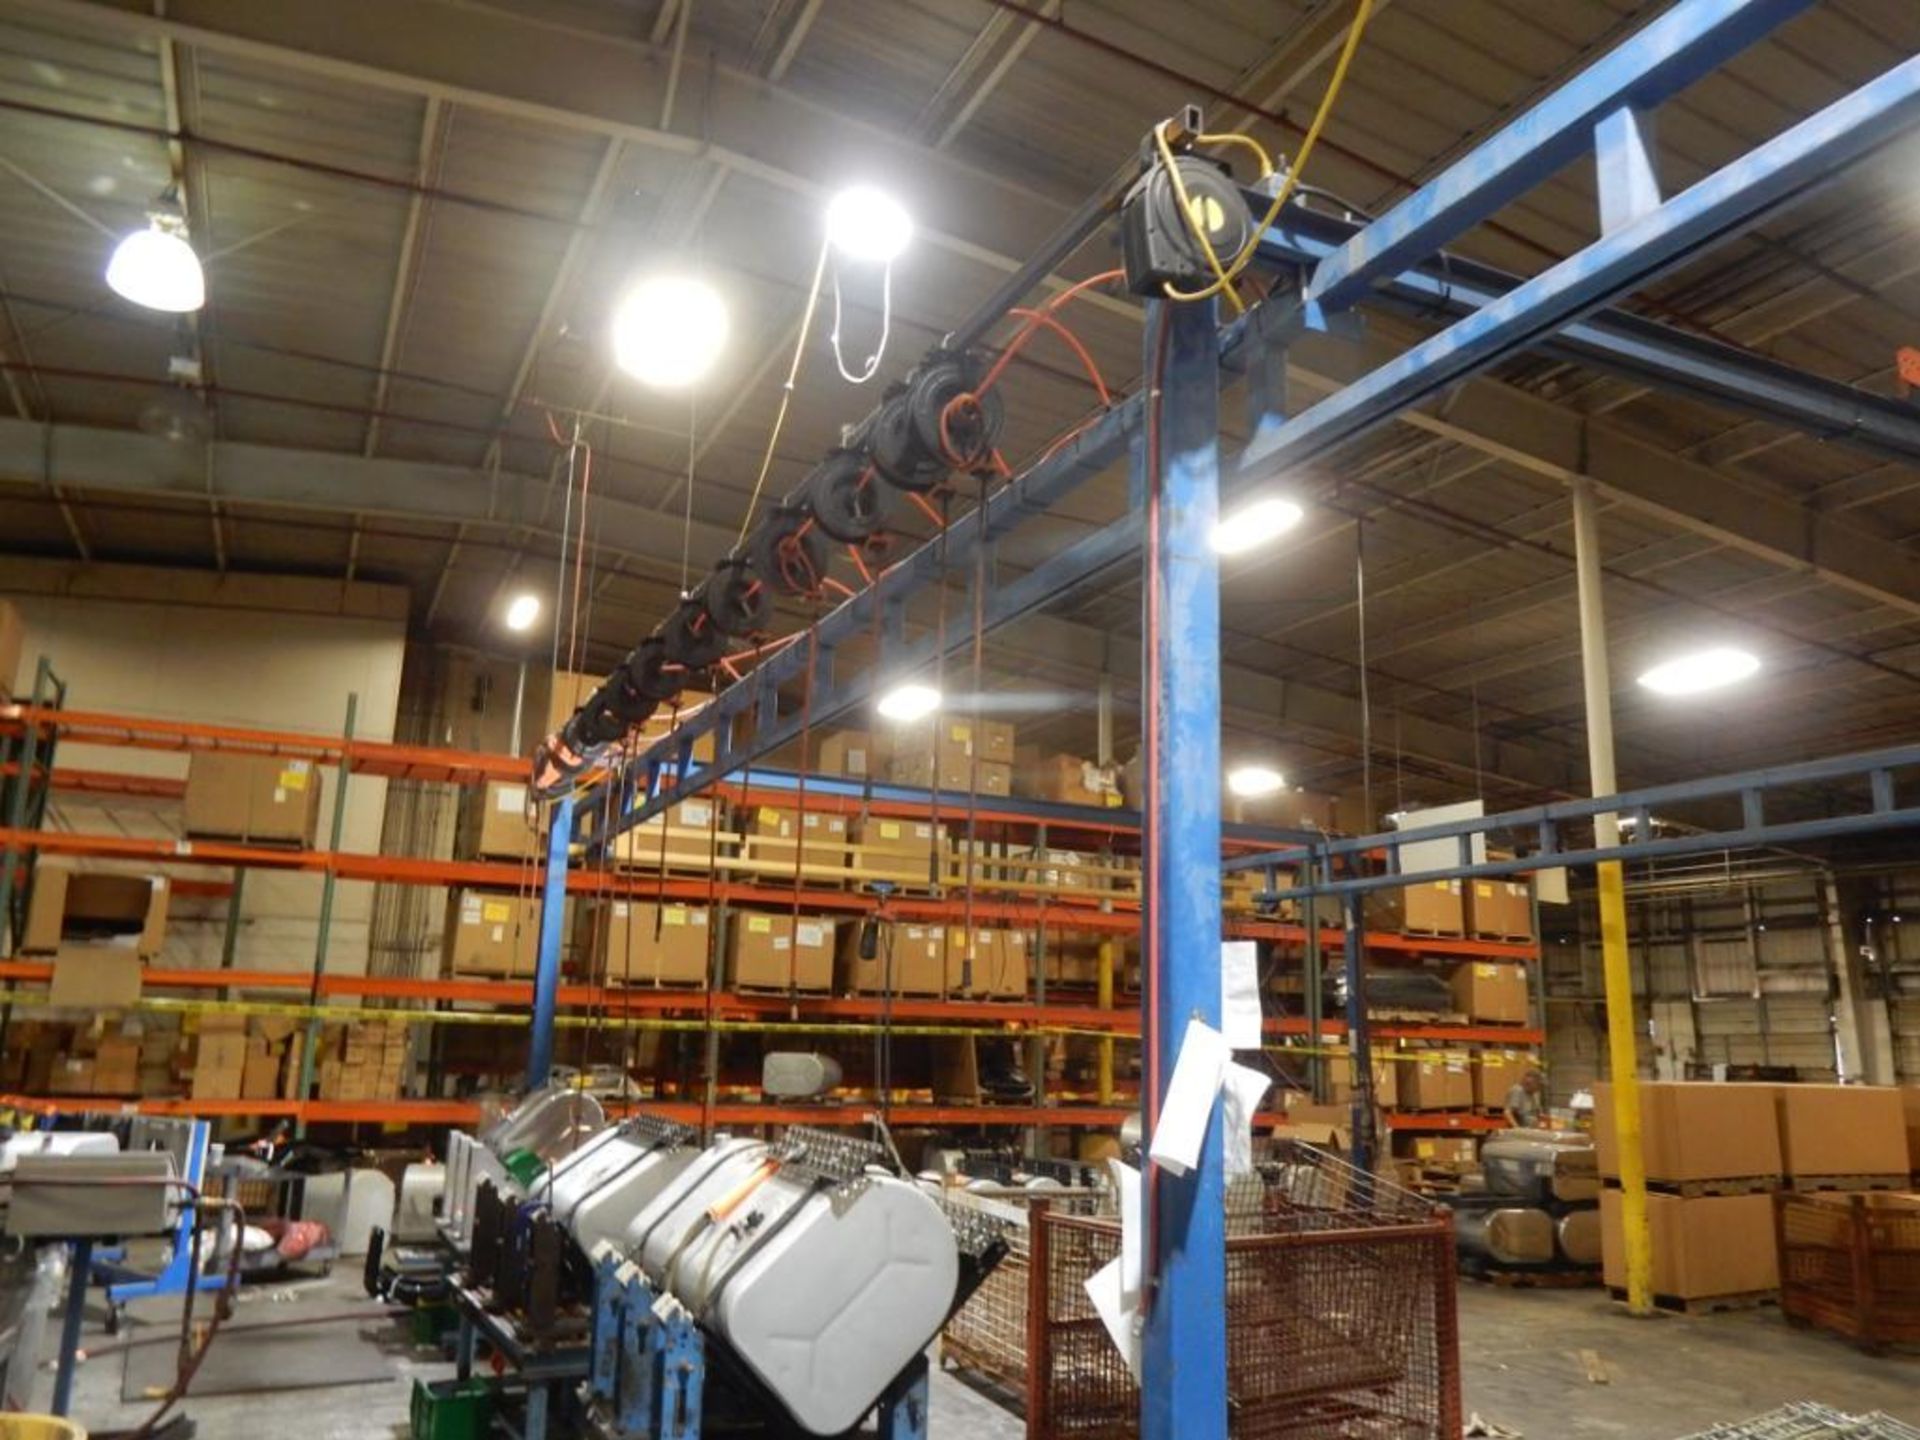 GORBEL FREESTANDING CRANE SYS., APPROX. 24' SPAN X 63', (2) 250 LB. UNDER HUNG BRIDGES, CM AIR CHAIN - Image 3 of 3